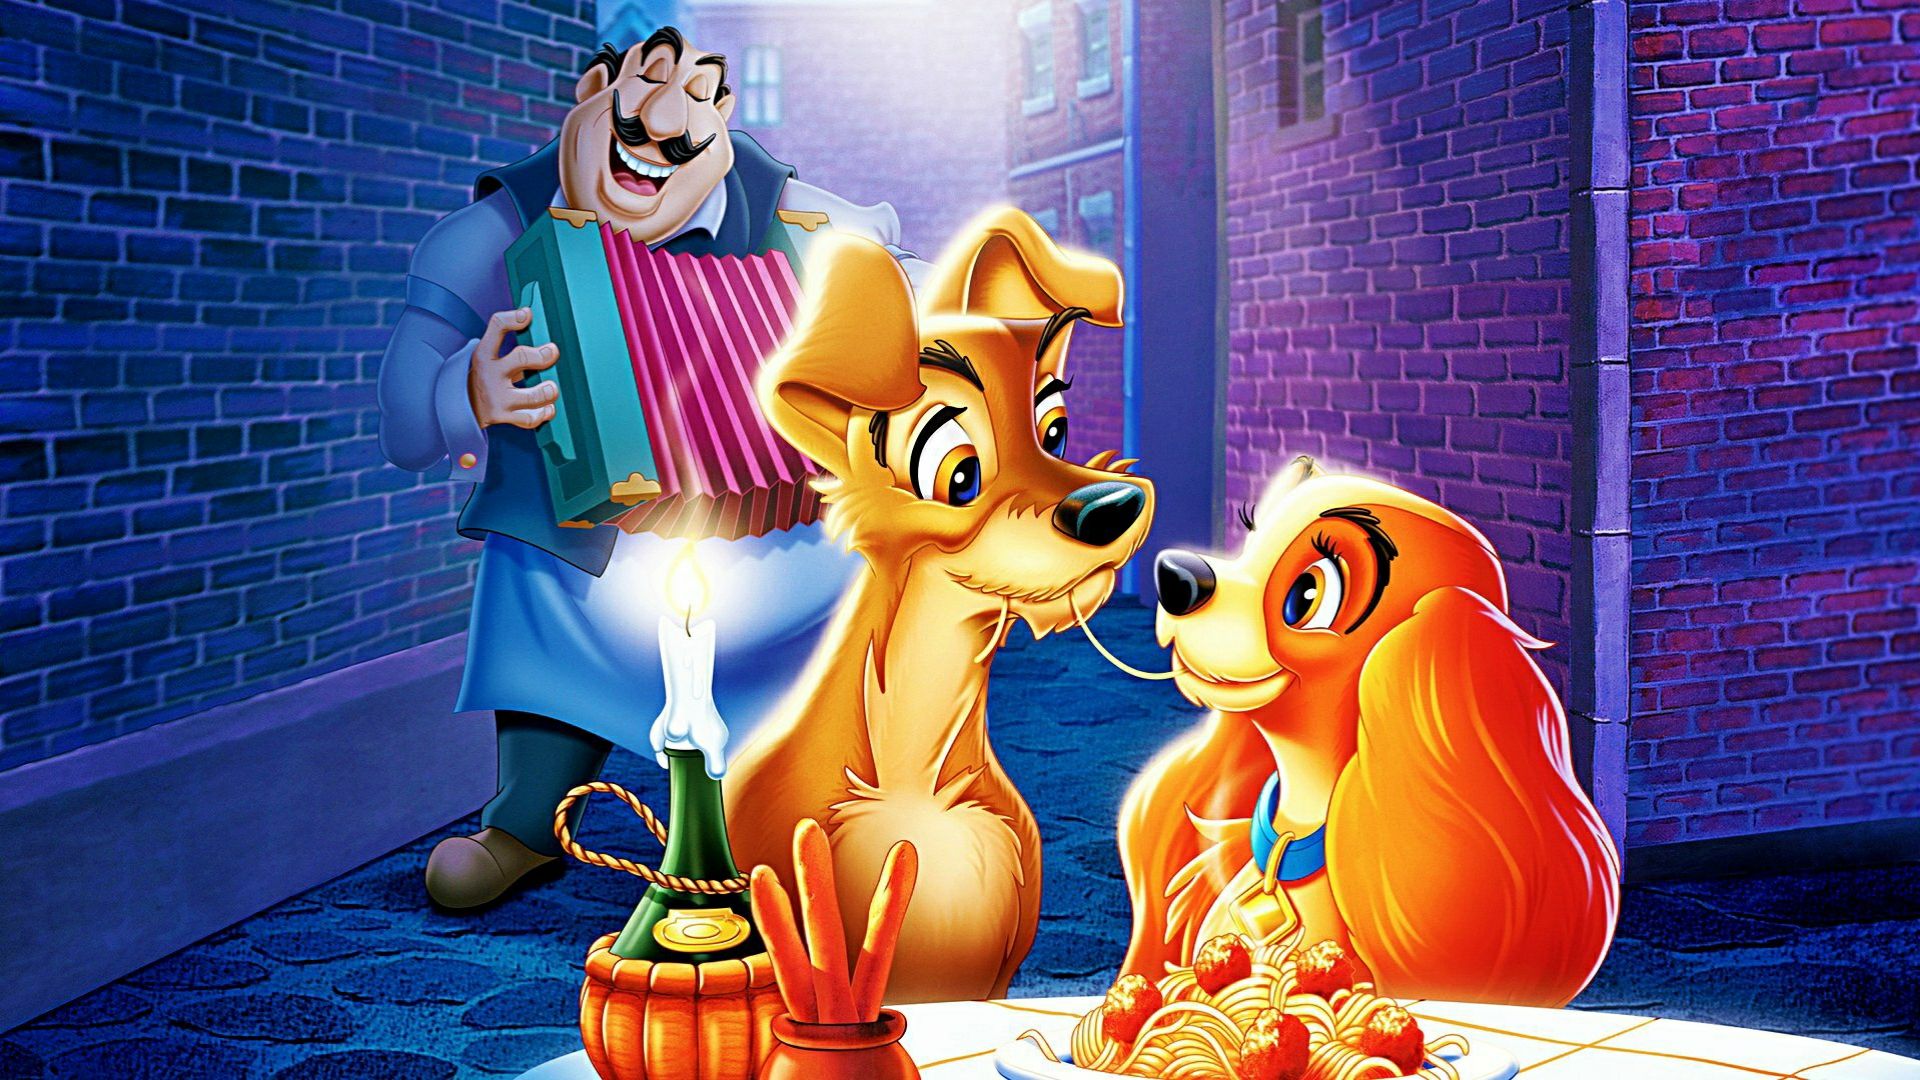 Movie Lady and the Tramp (1955) HD Wallpaper | Background Image